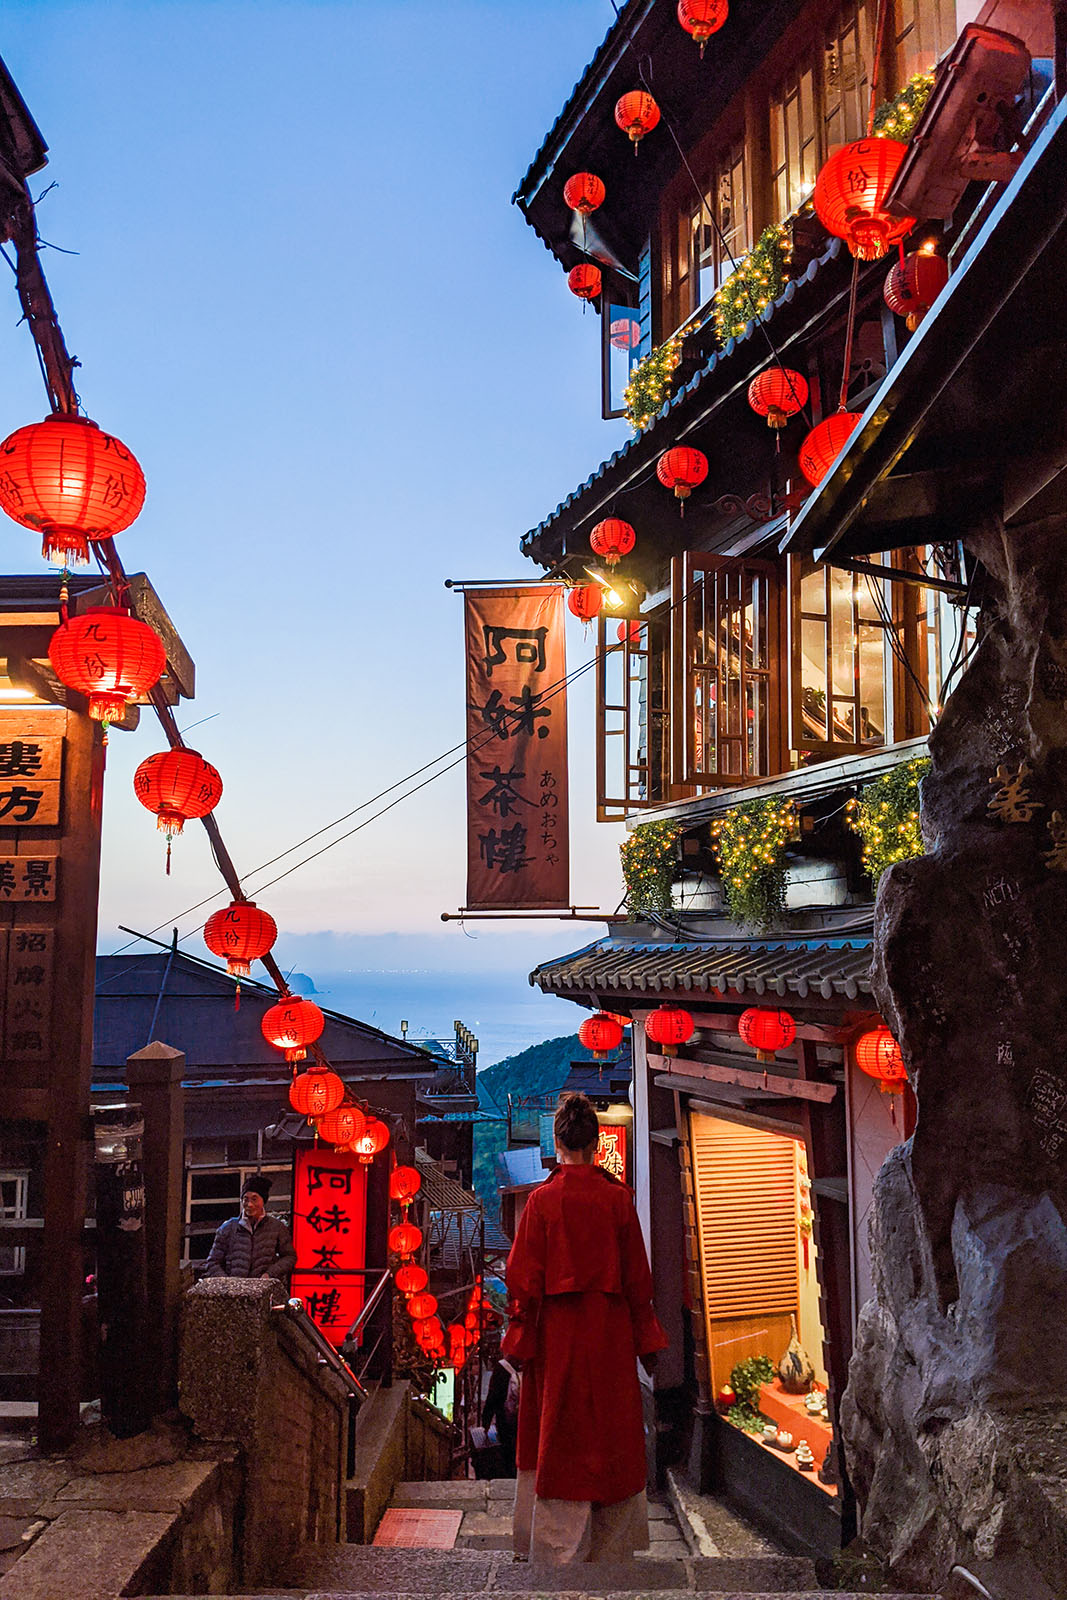 The steep grade of Jiufen's streets results in spectacular views of the Northern Coast.